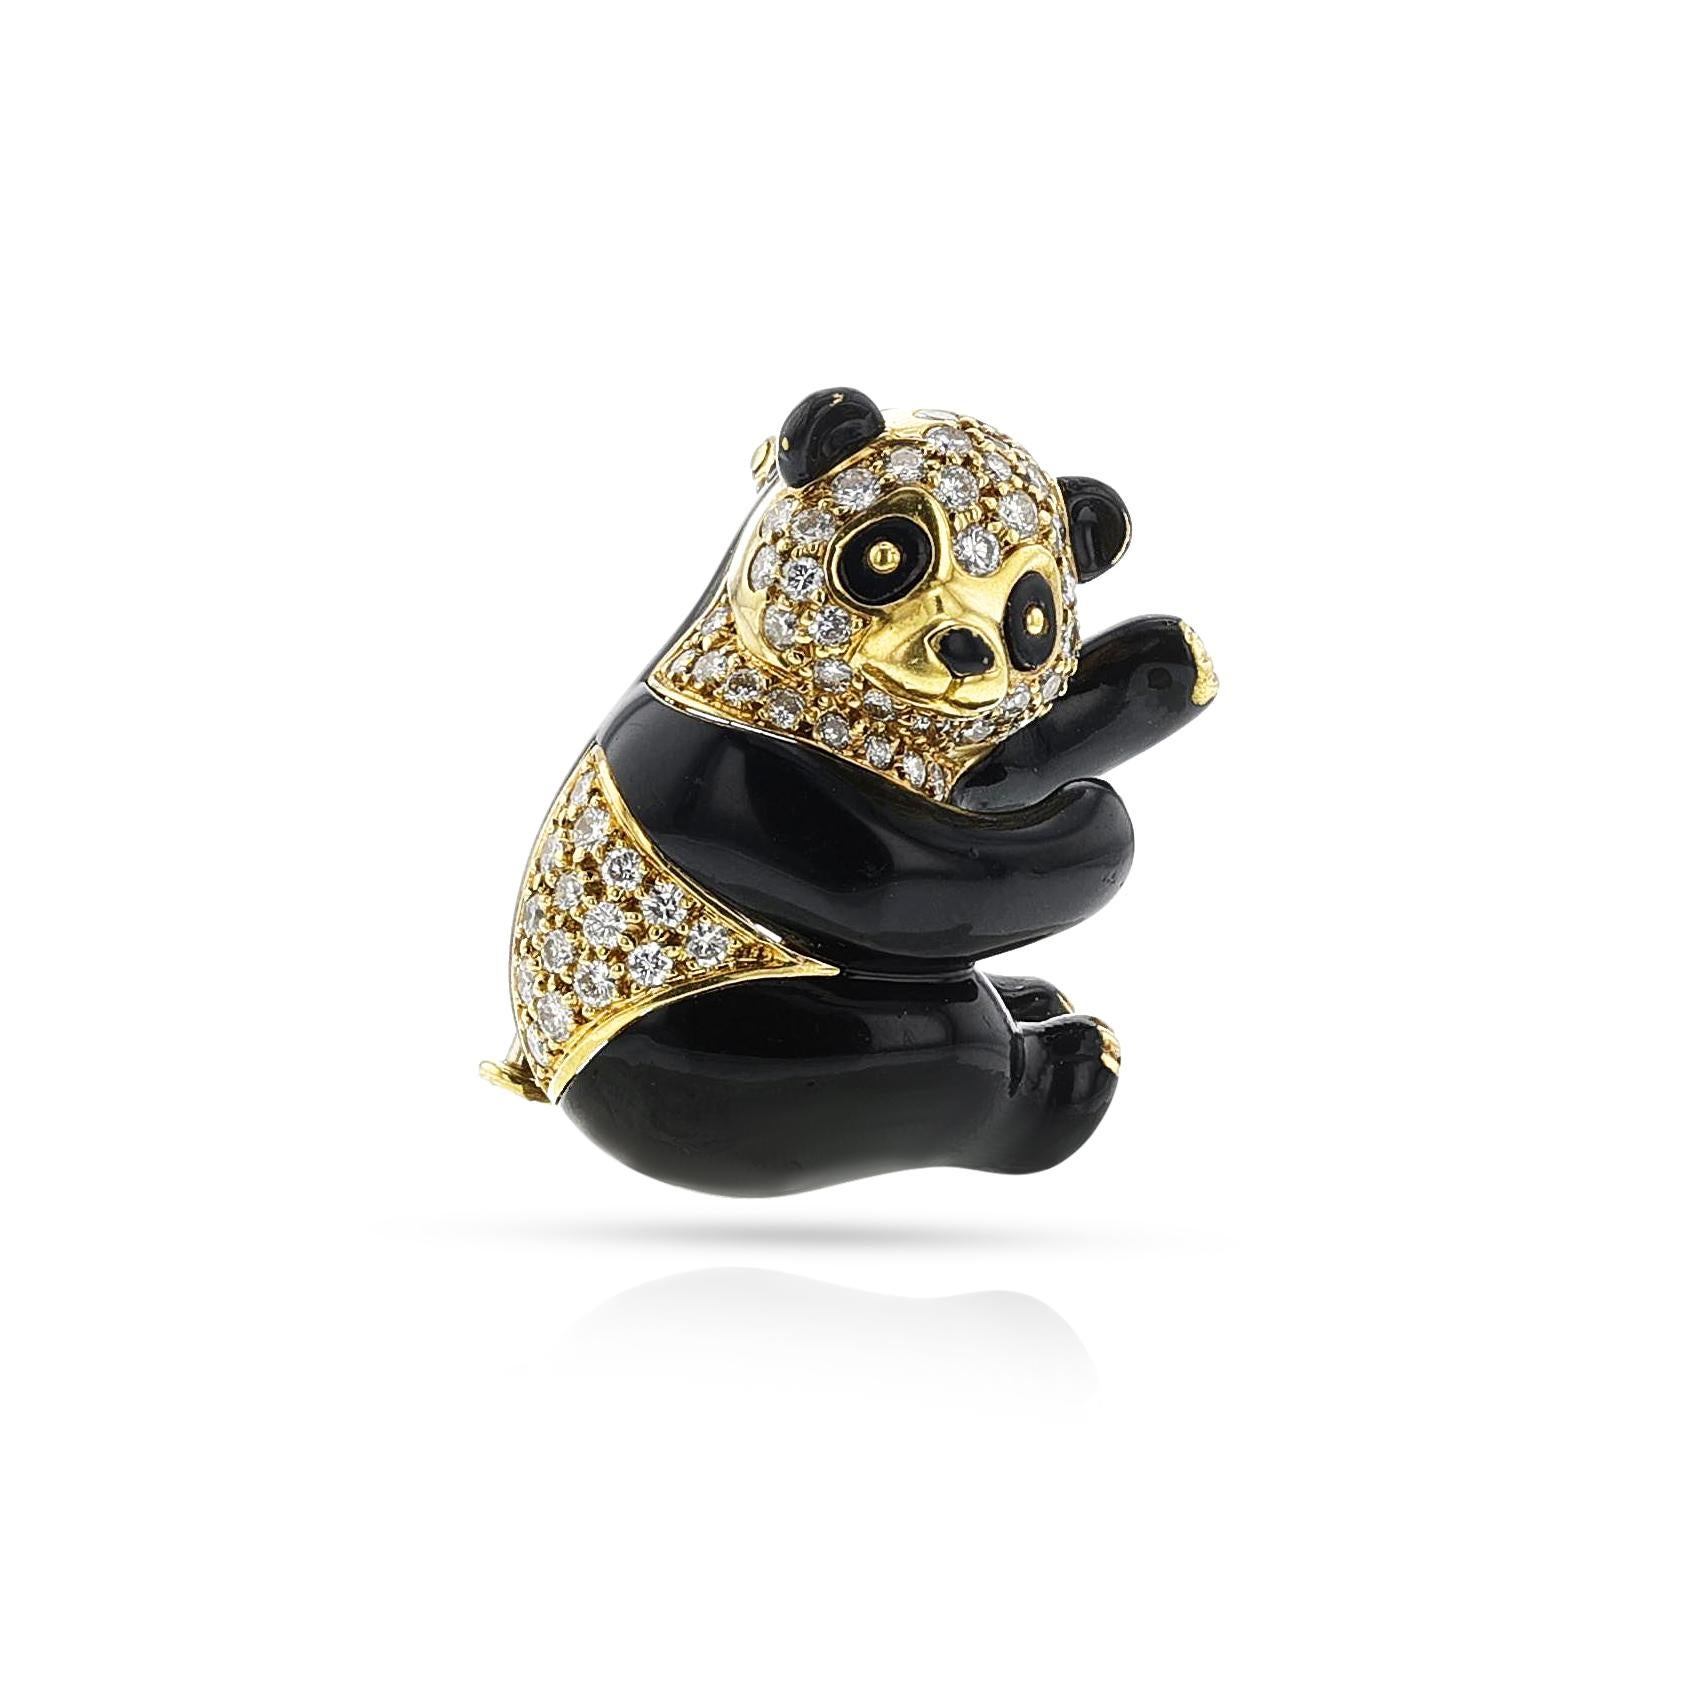 A Van Cleef & Arpels Enamel and Diamond Panda Brooch made in 18k Gold. From the year 1986. Clip signed VCA, numbered.



SKU: 1501